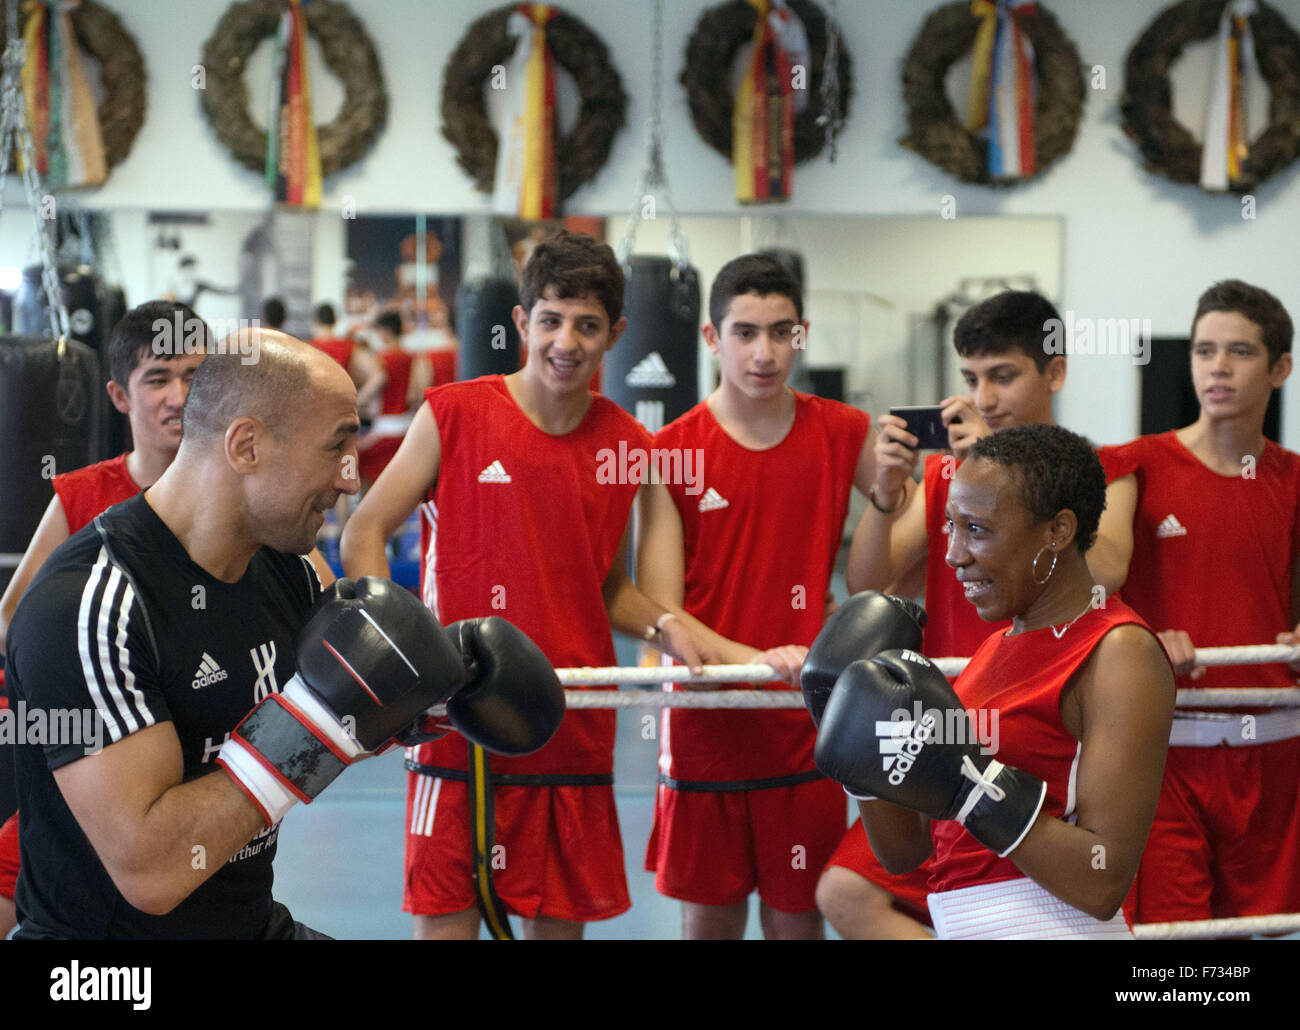 Boxing world champion Arthur Abraham (front L) spars with a young woman from Sierra Leone during a training session at the Max Schmeling Gymnasium in Berlin, Germany, 24 November 2015. The event featuring unaccompanied refugees was organised by Team Sauerland, sporting goods manufacturer Adidas, the German Confederation of Skilled Crafts and German political party CDU. Photo: SOEREN STACHE/dpa Stock Photo